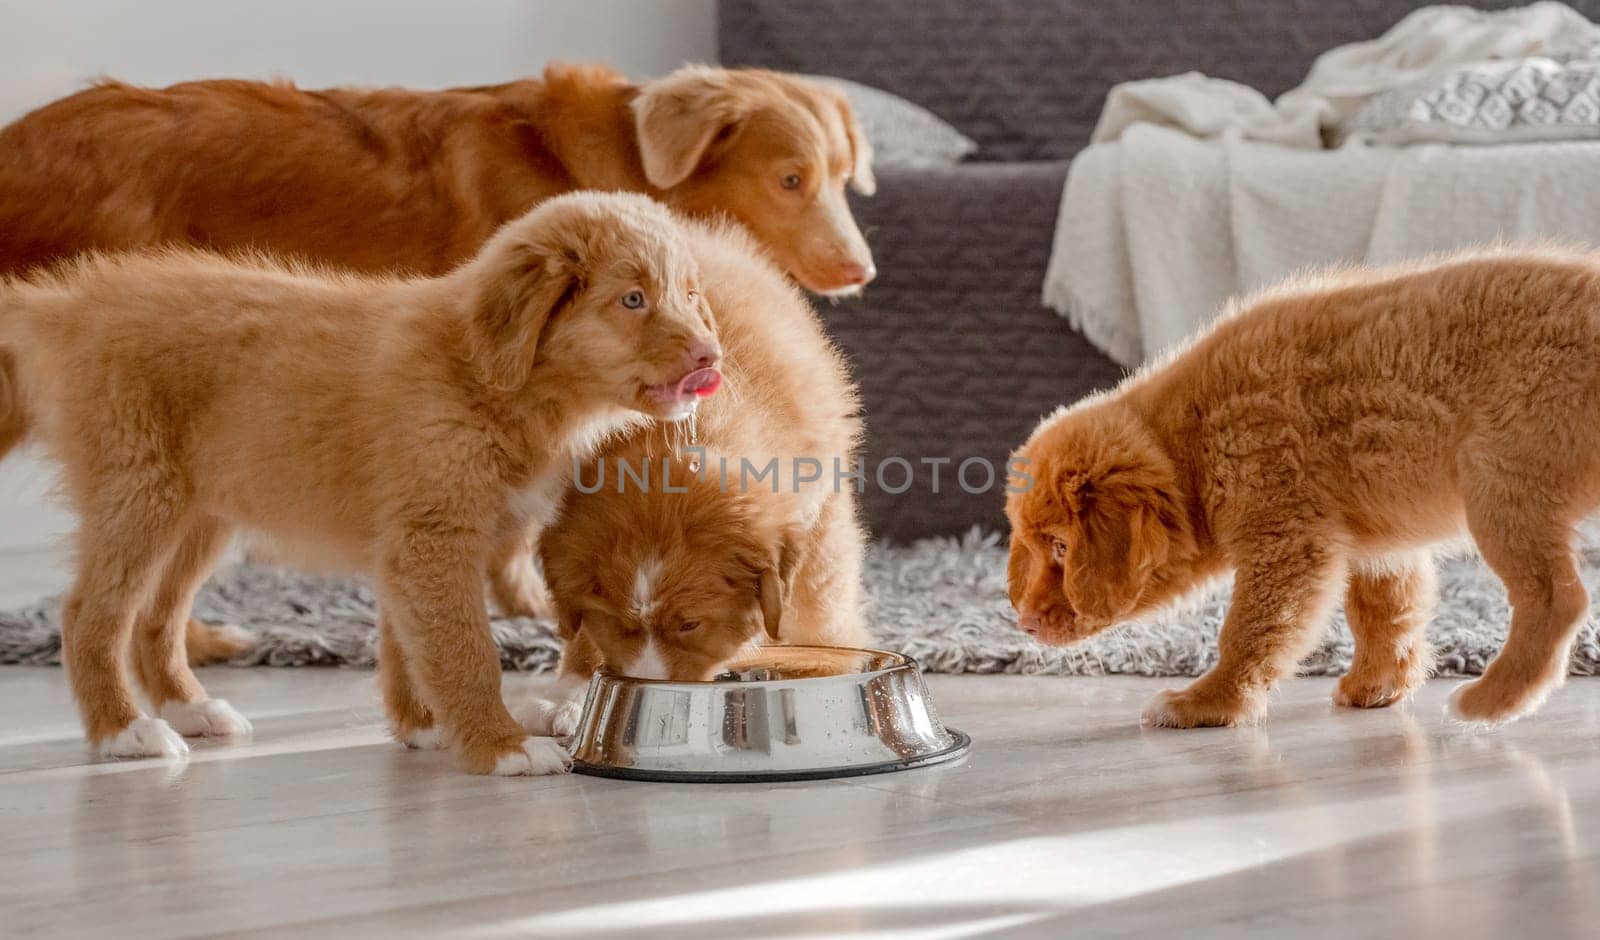 Three Toller Puppies Are Drinking From One Bowl At Home, A Nova Scotia Duck Tolling Retriever Breed